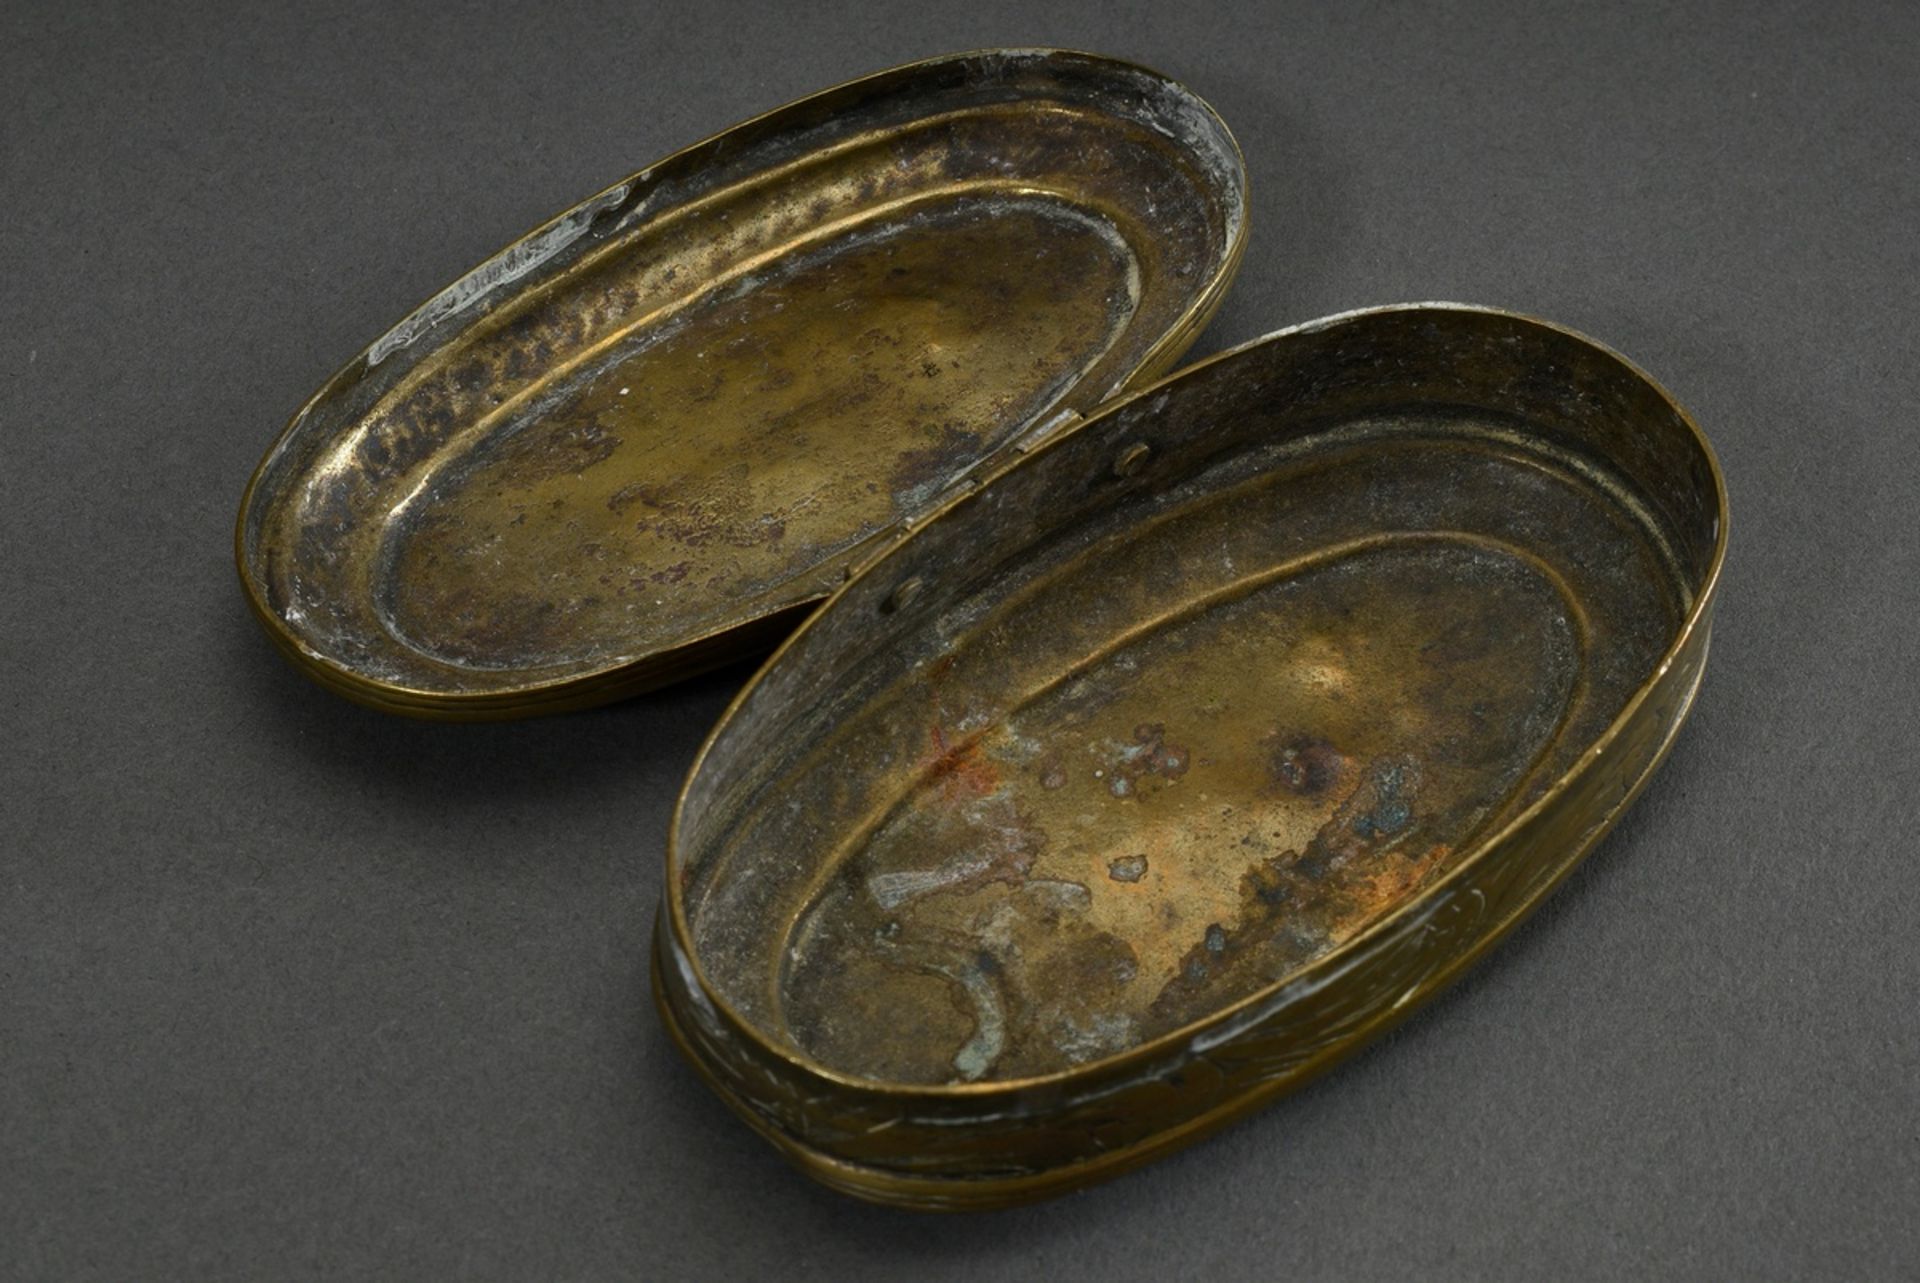 Oval Dutch snuff box with finely engraved scenes in tondi "Drinking couple" (inscribed: dat edel Na - Image 3 of 4